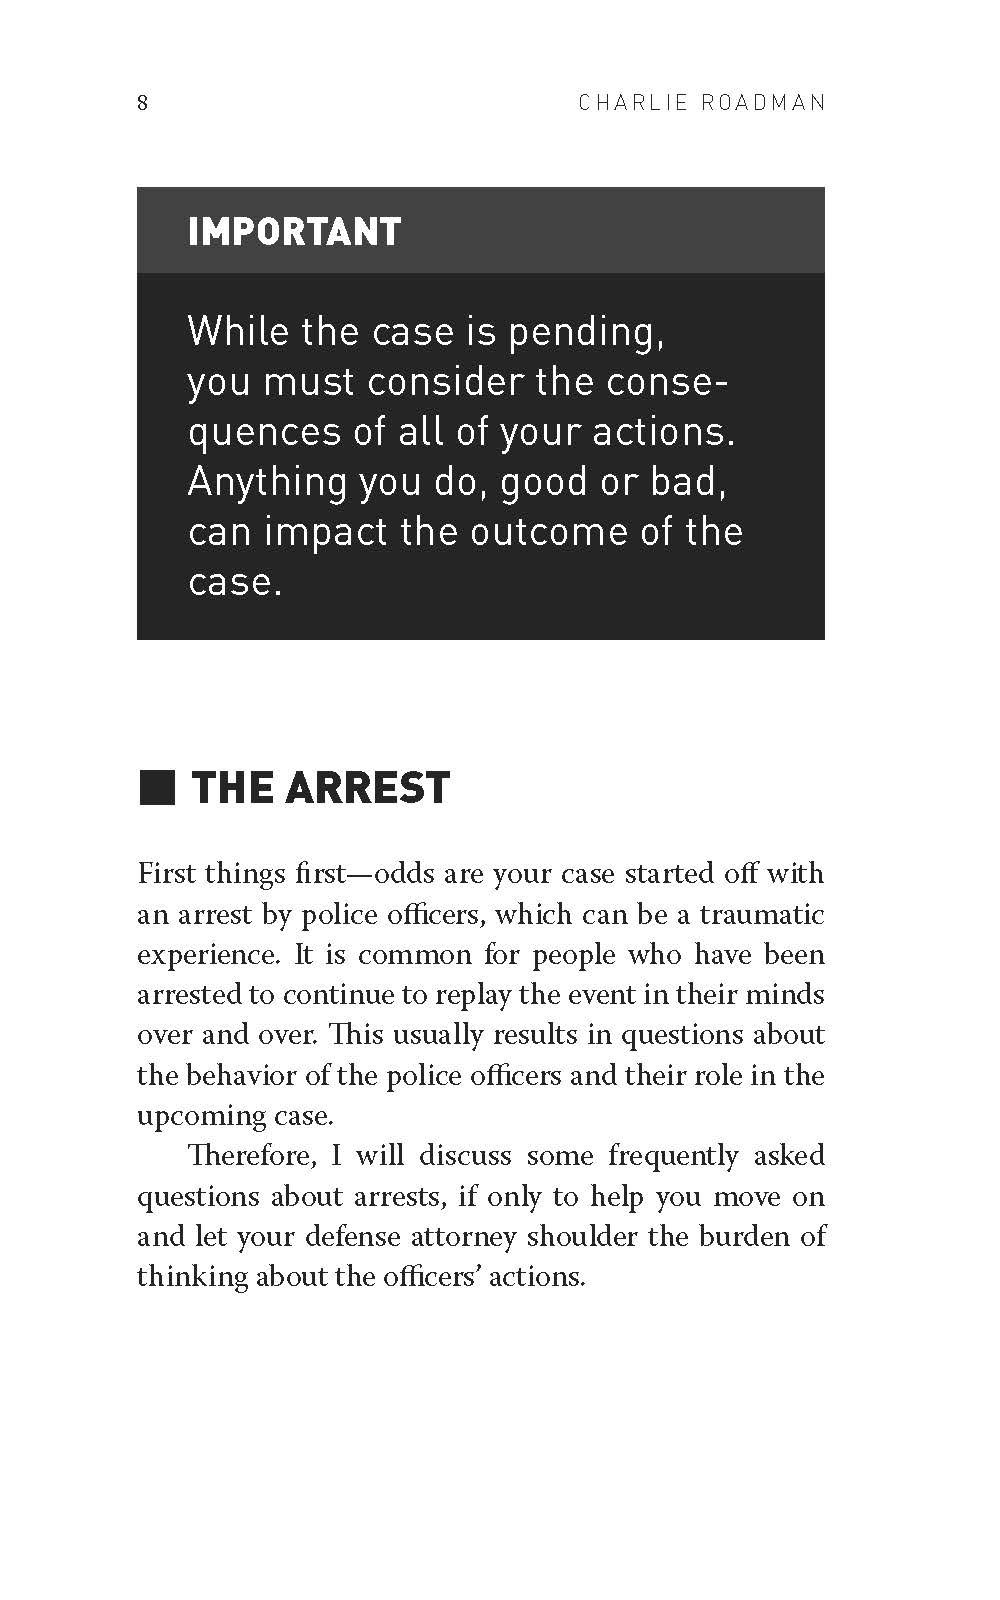 Sample_of_Defendant_s_Guide_to_Defense_Page_11.jpg